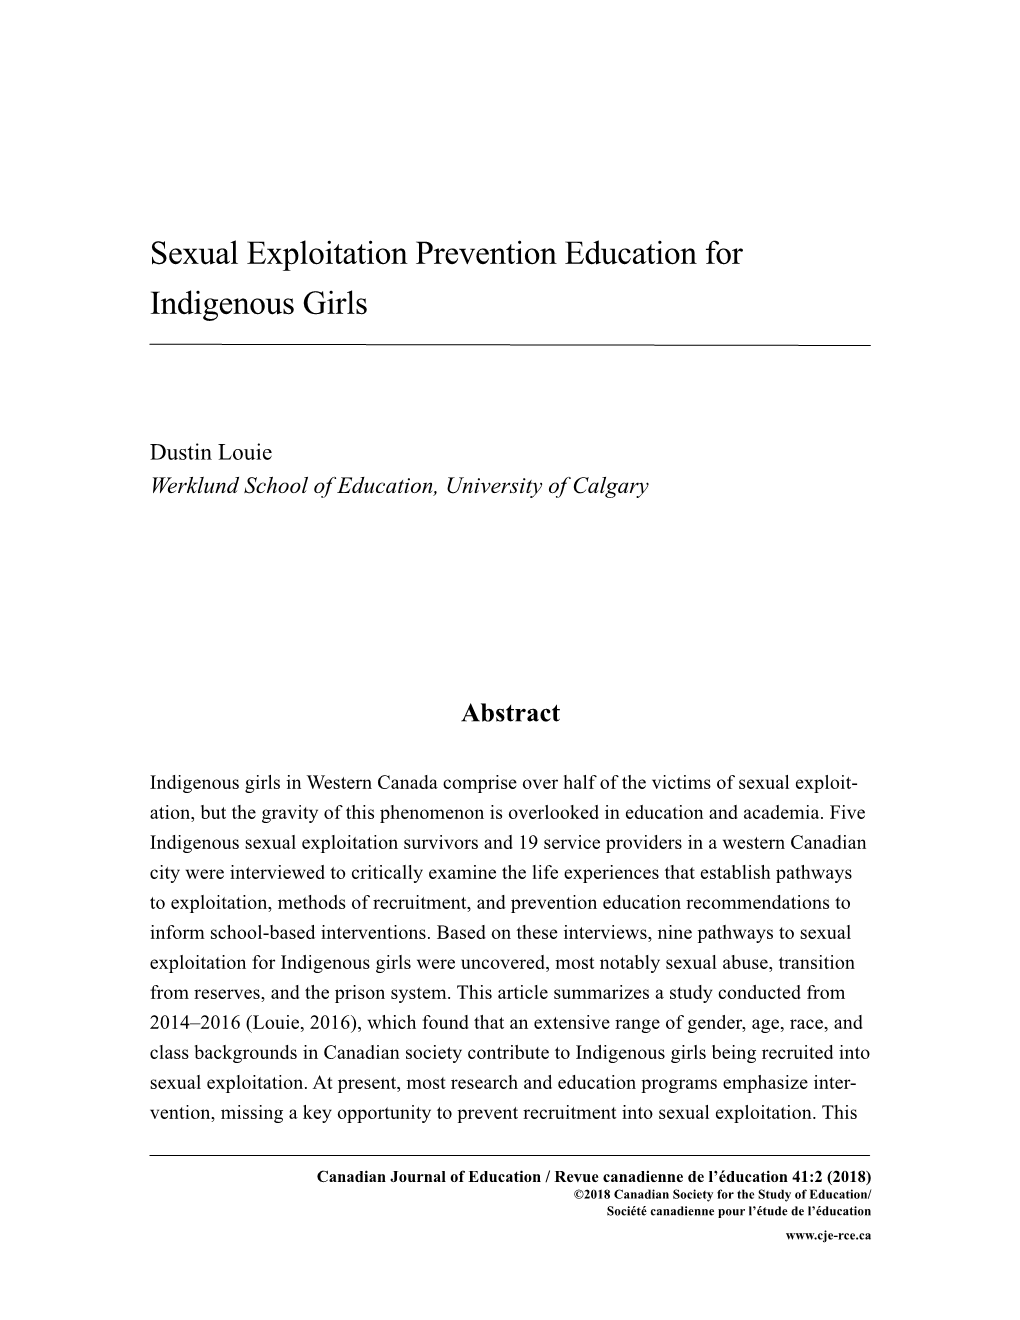 Sexual Exploitation Prevention Education for Indigenous Girls